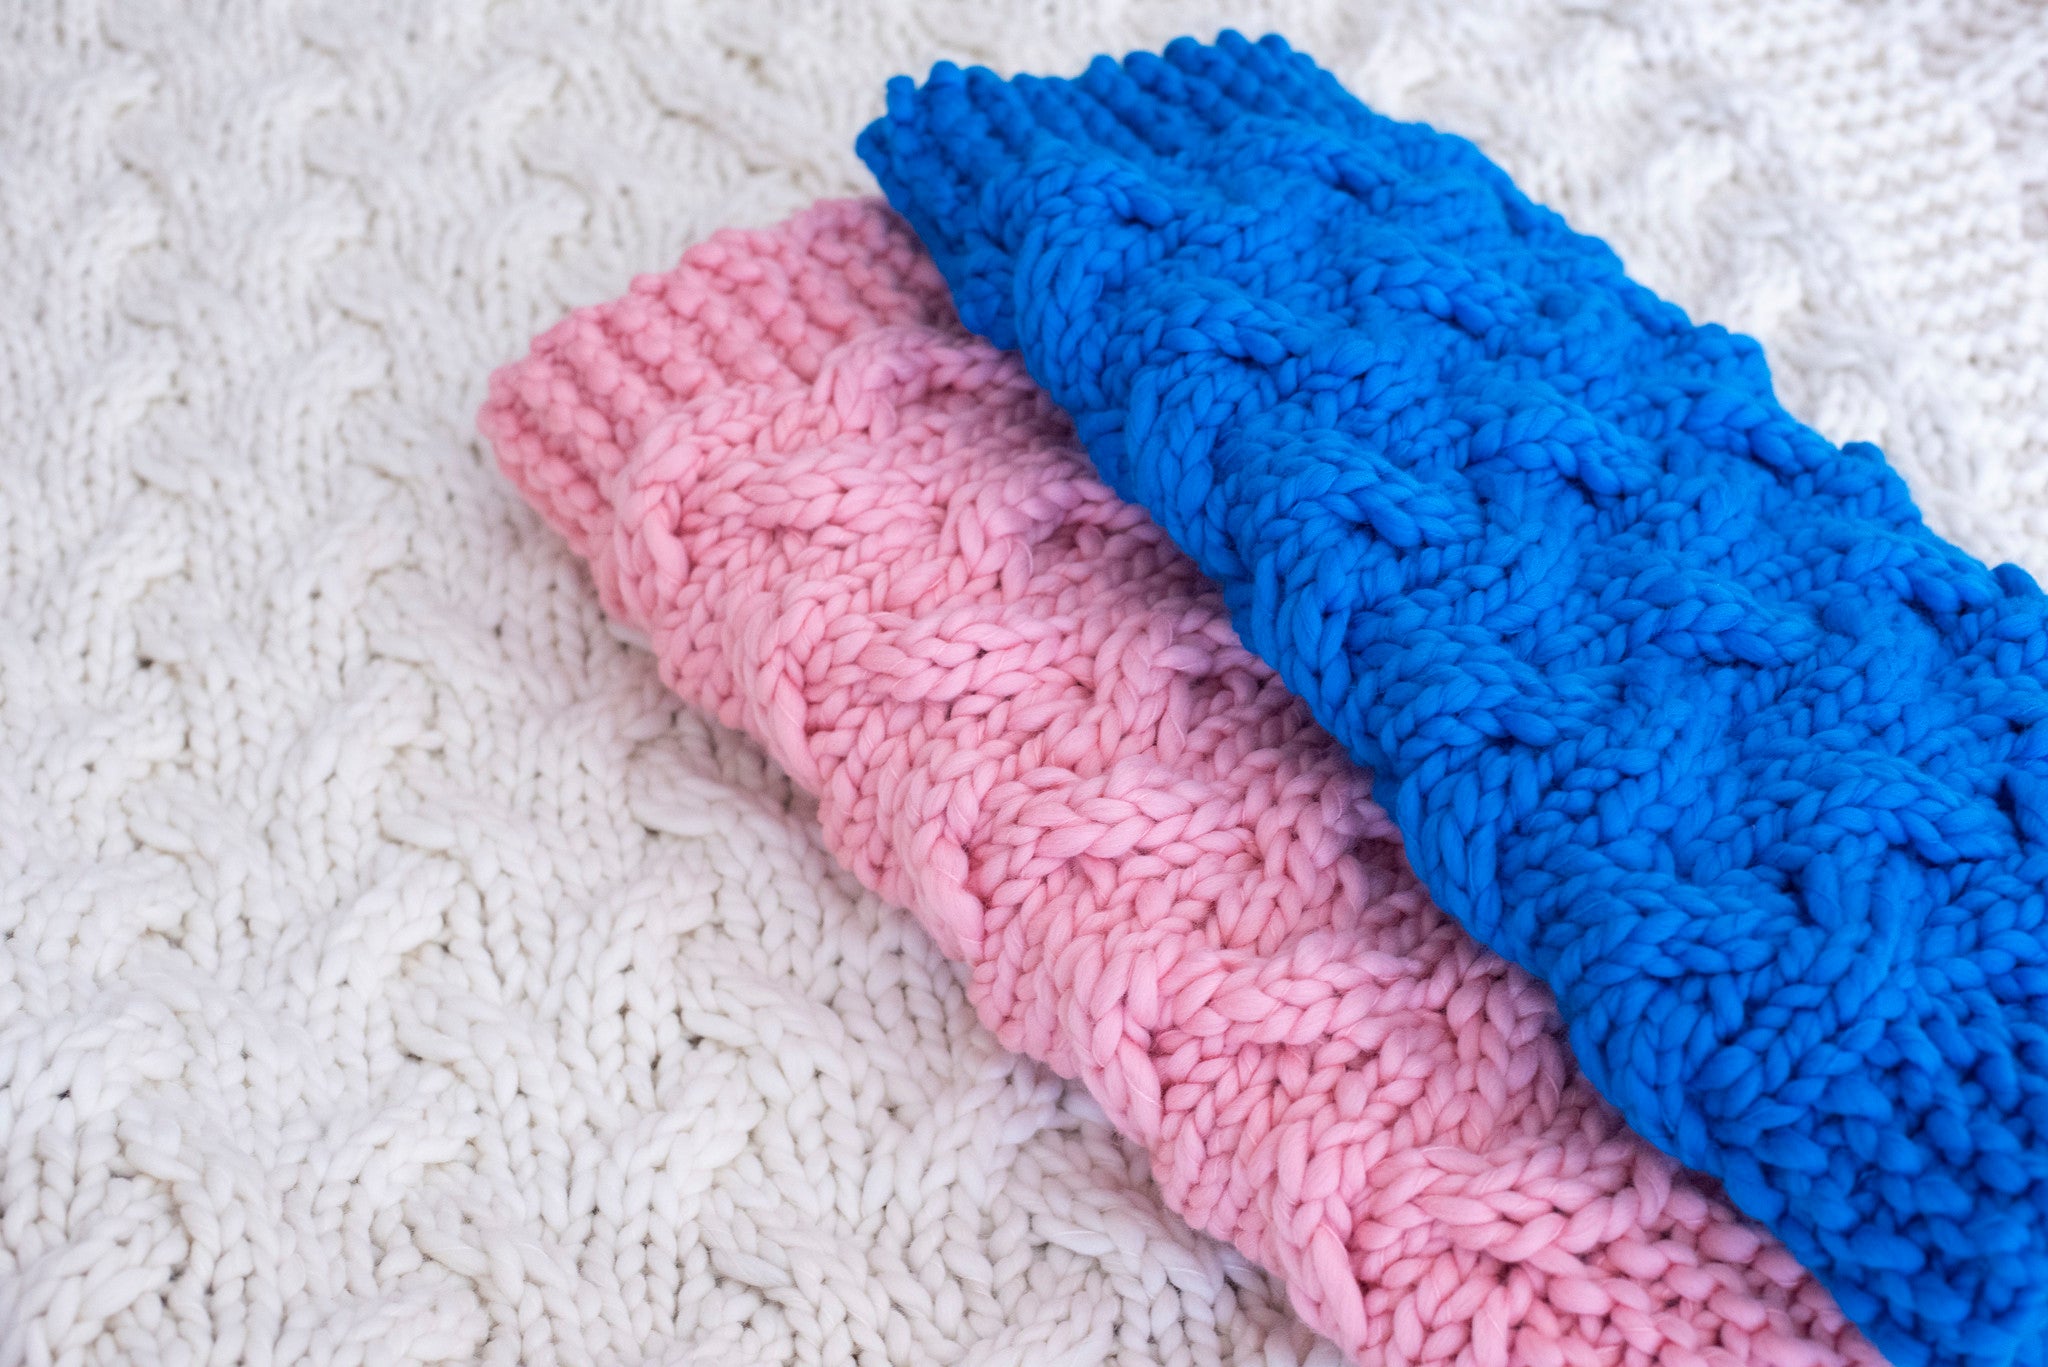 Easy Chunky Cable Blanket Knitting Pattern